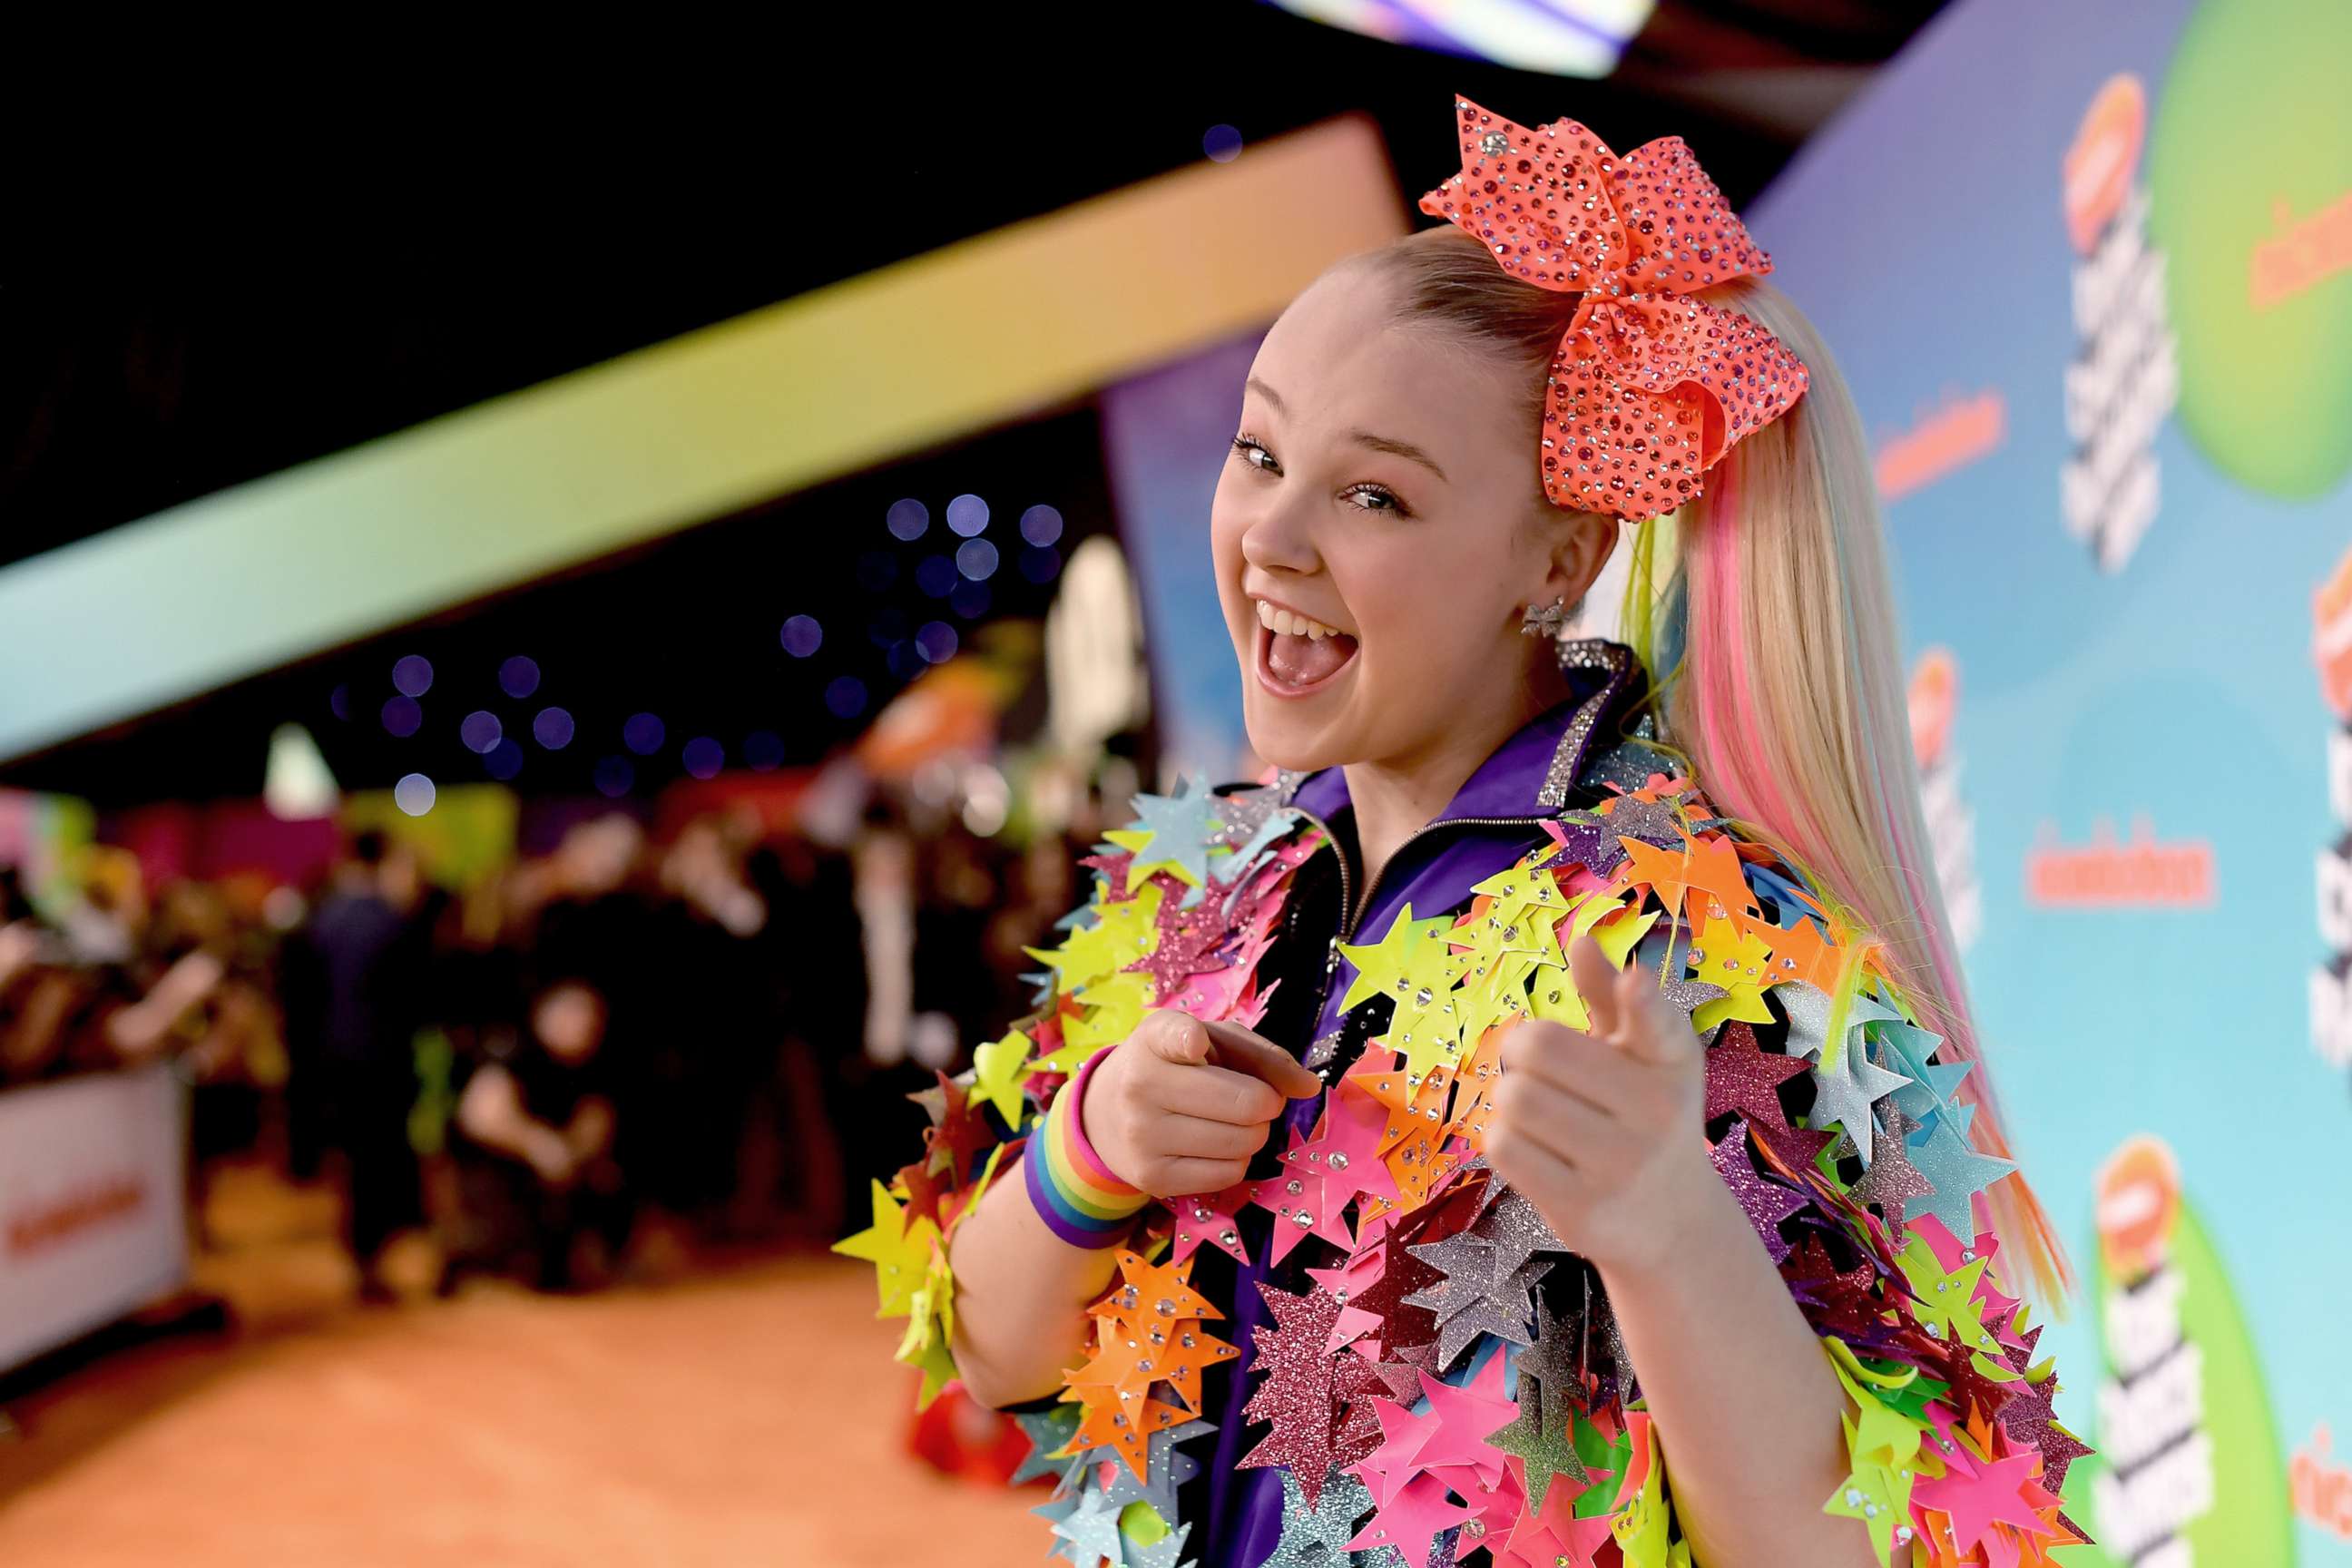 PHOTO: JoJo Siwa attends an event, March 23, 2019, in Los Angeles.